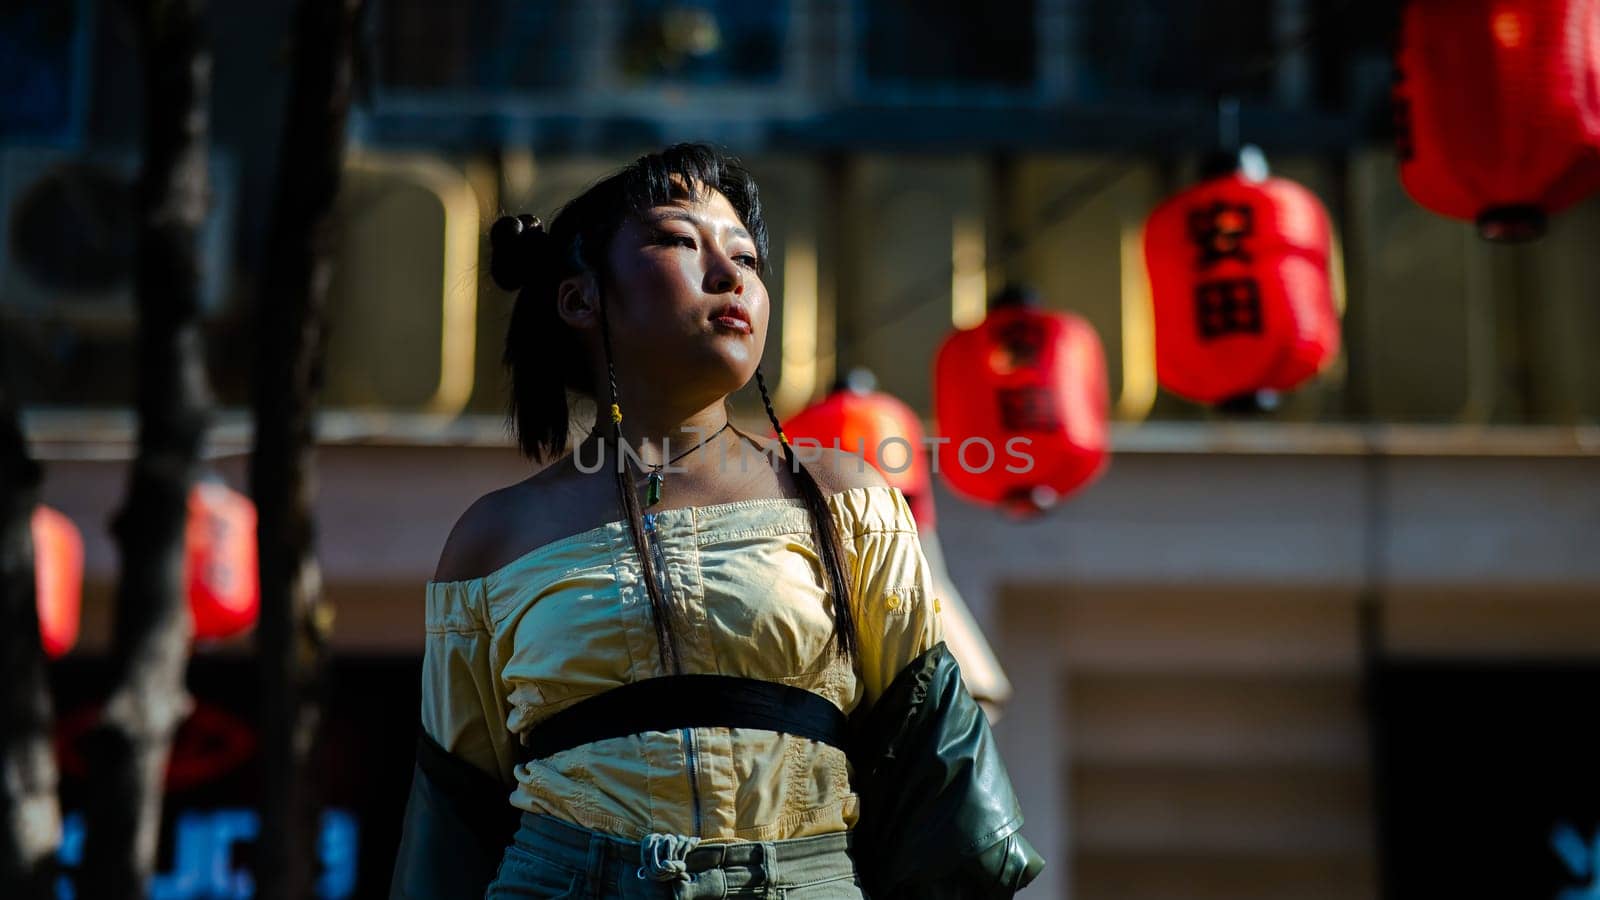 Portrait of an Asian woman against the background of Chinese lanterns. by mrwed54